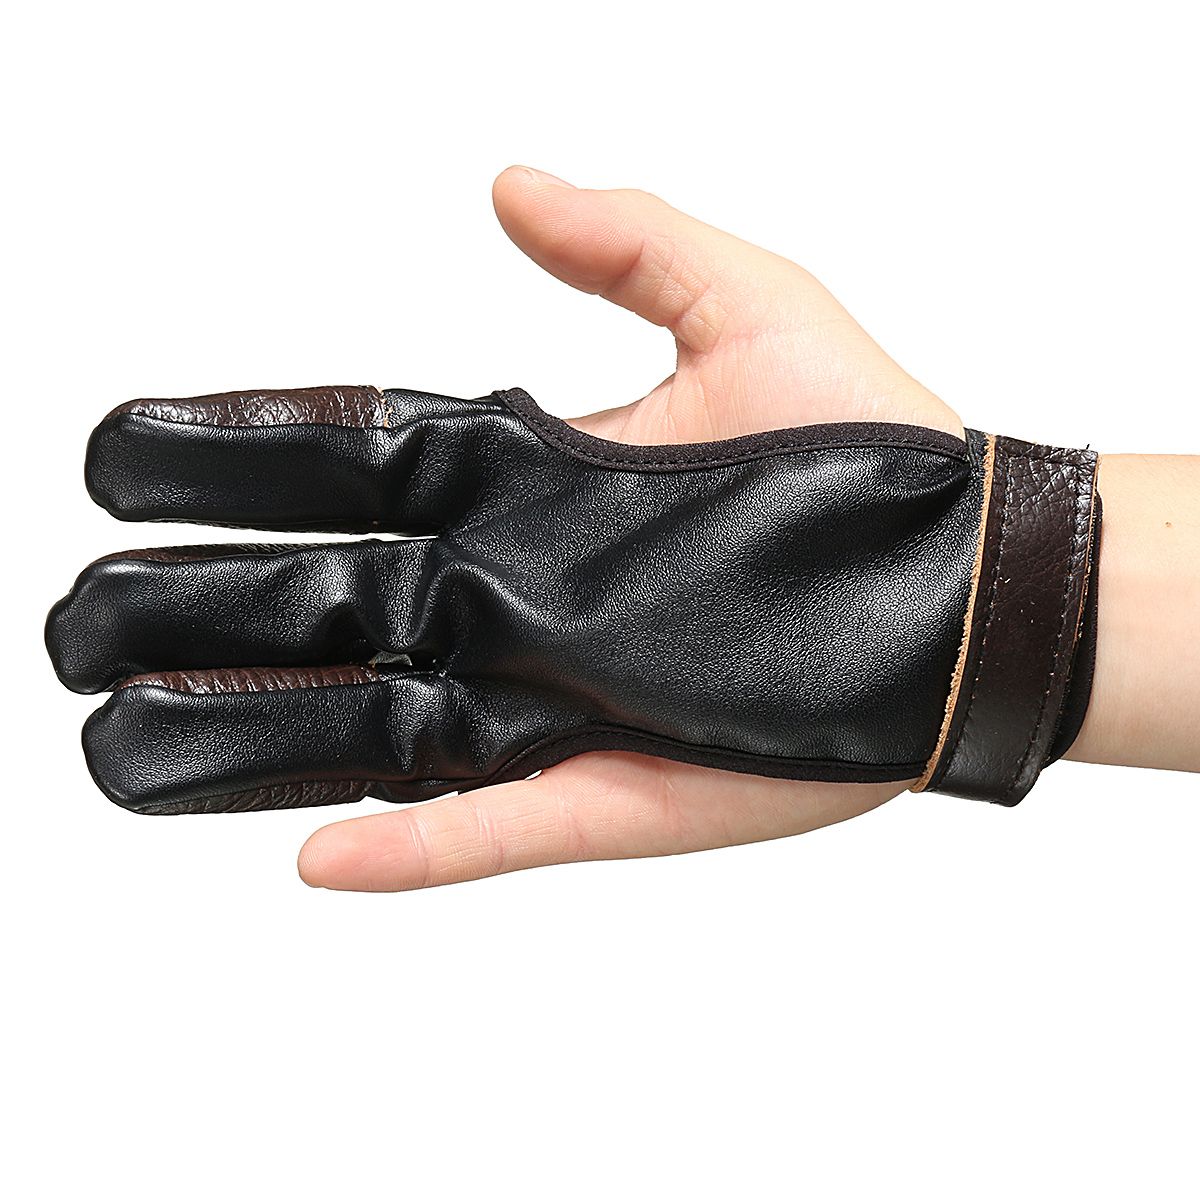 1Pcs-Archery-Finger-Protect-Glove-3-Finger-Pull-Bow-Leather-Shooting-Glove--for-Archery-Hunting-Shoo-1624284